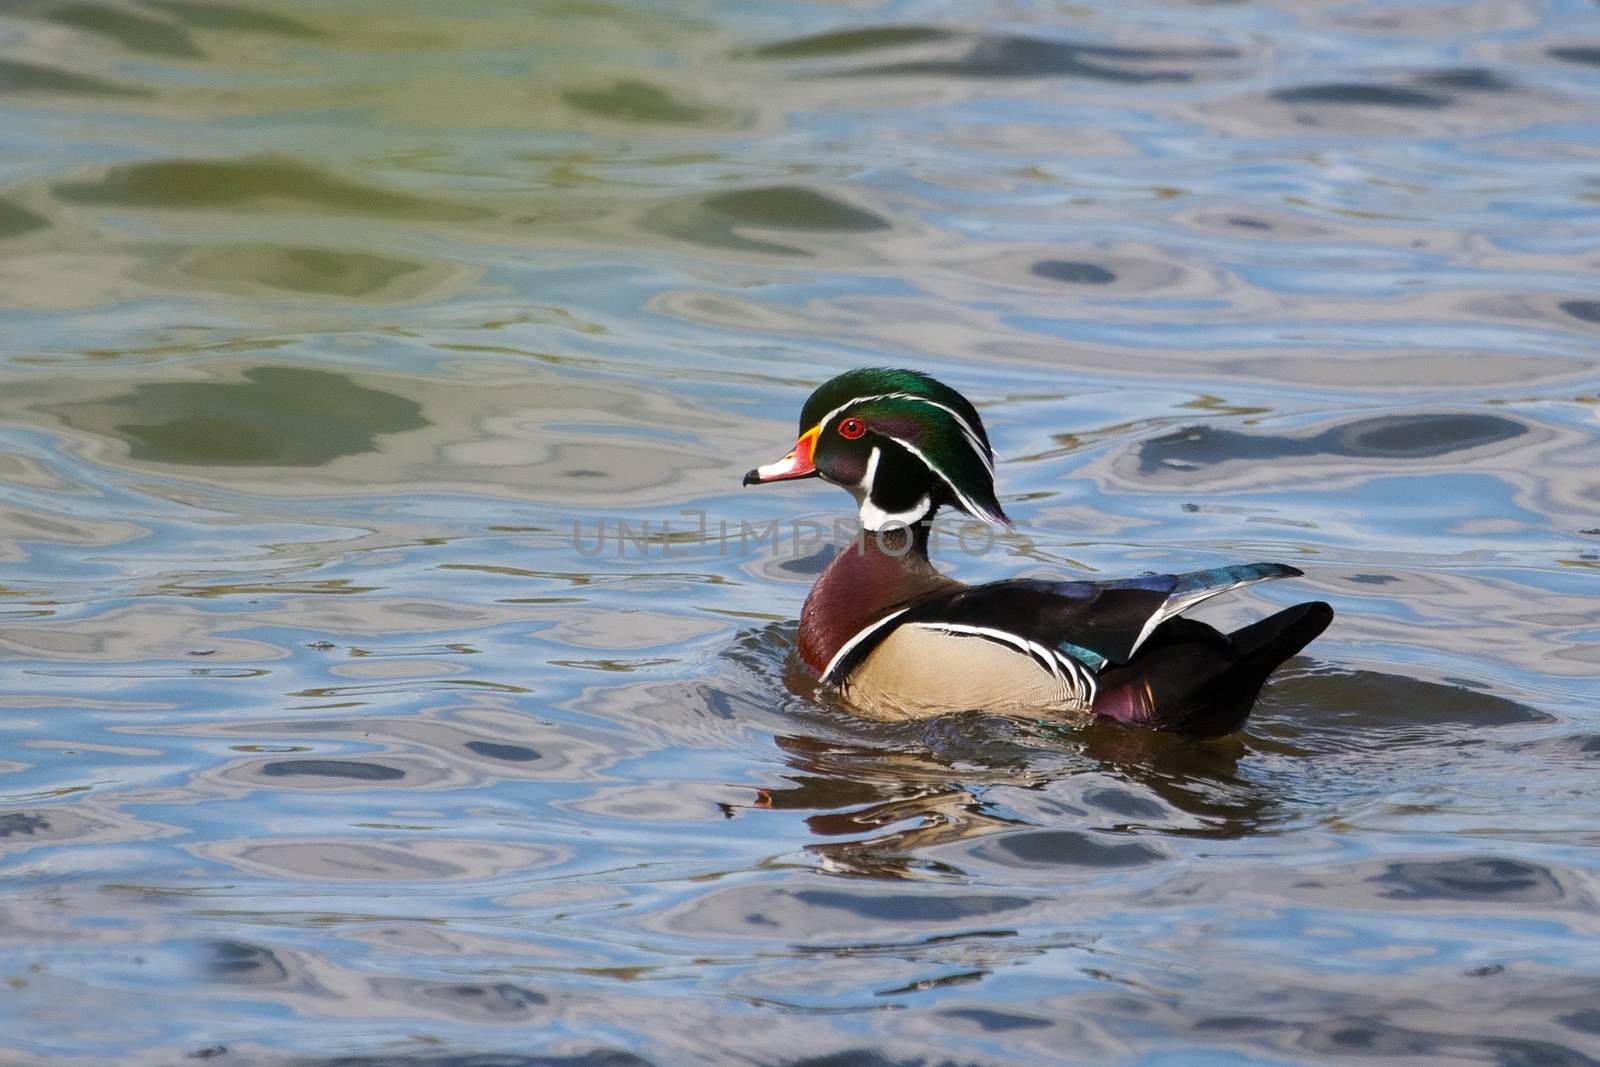 Male wood duck swimming in a lake